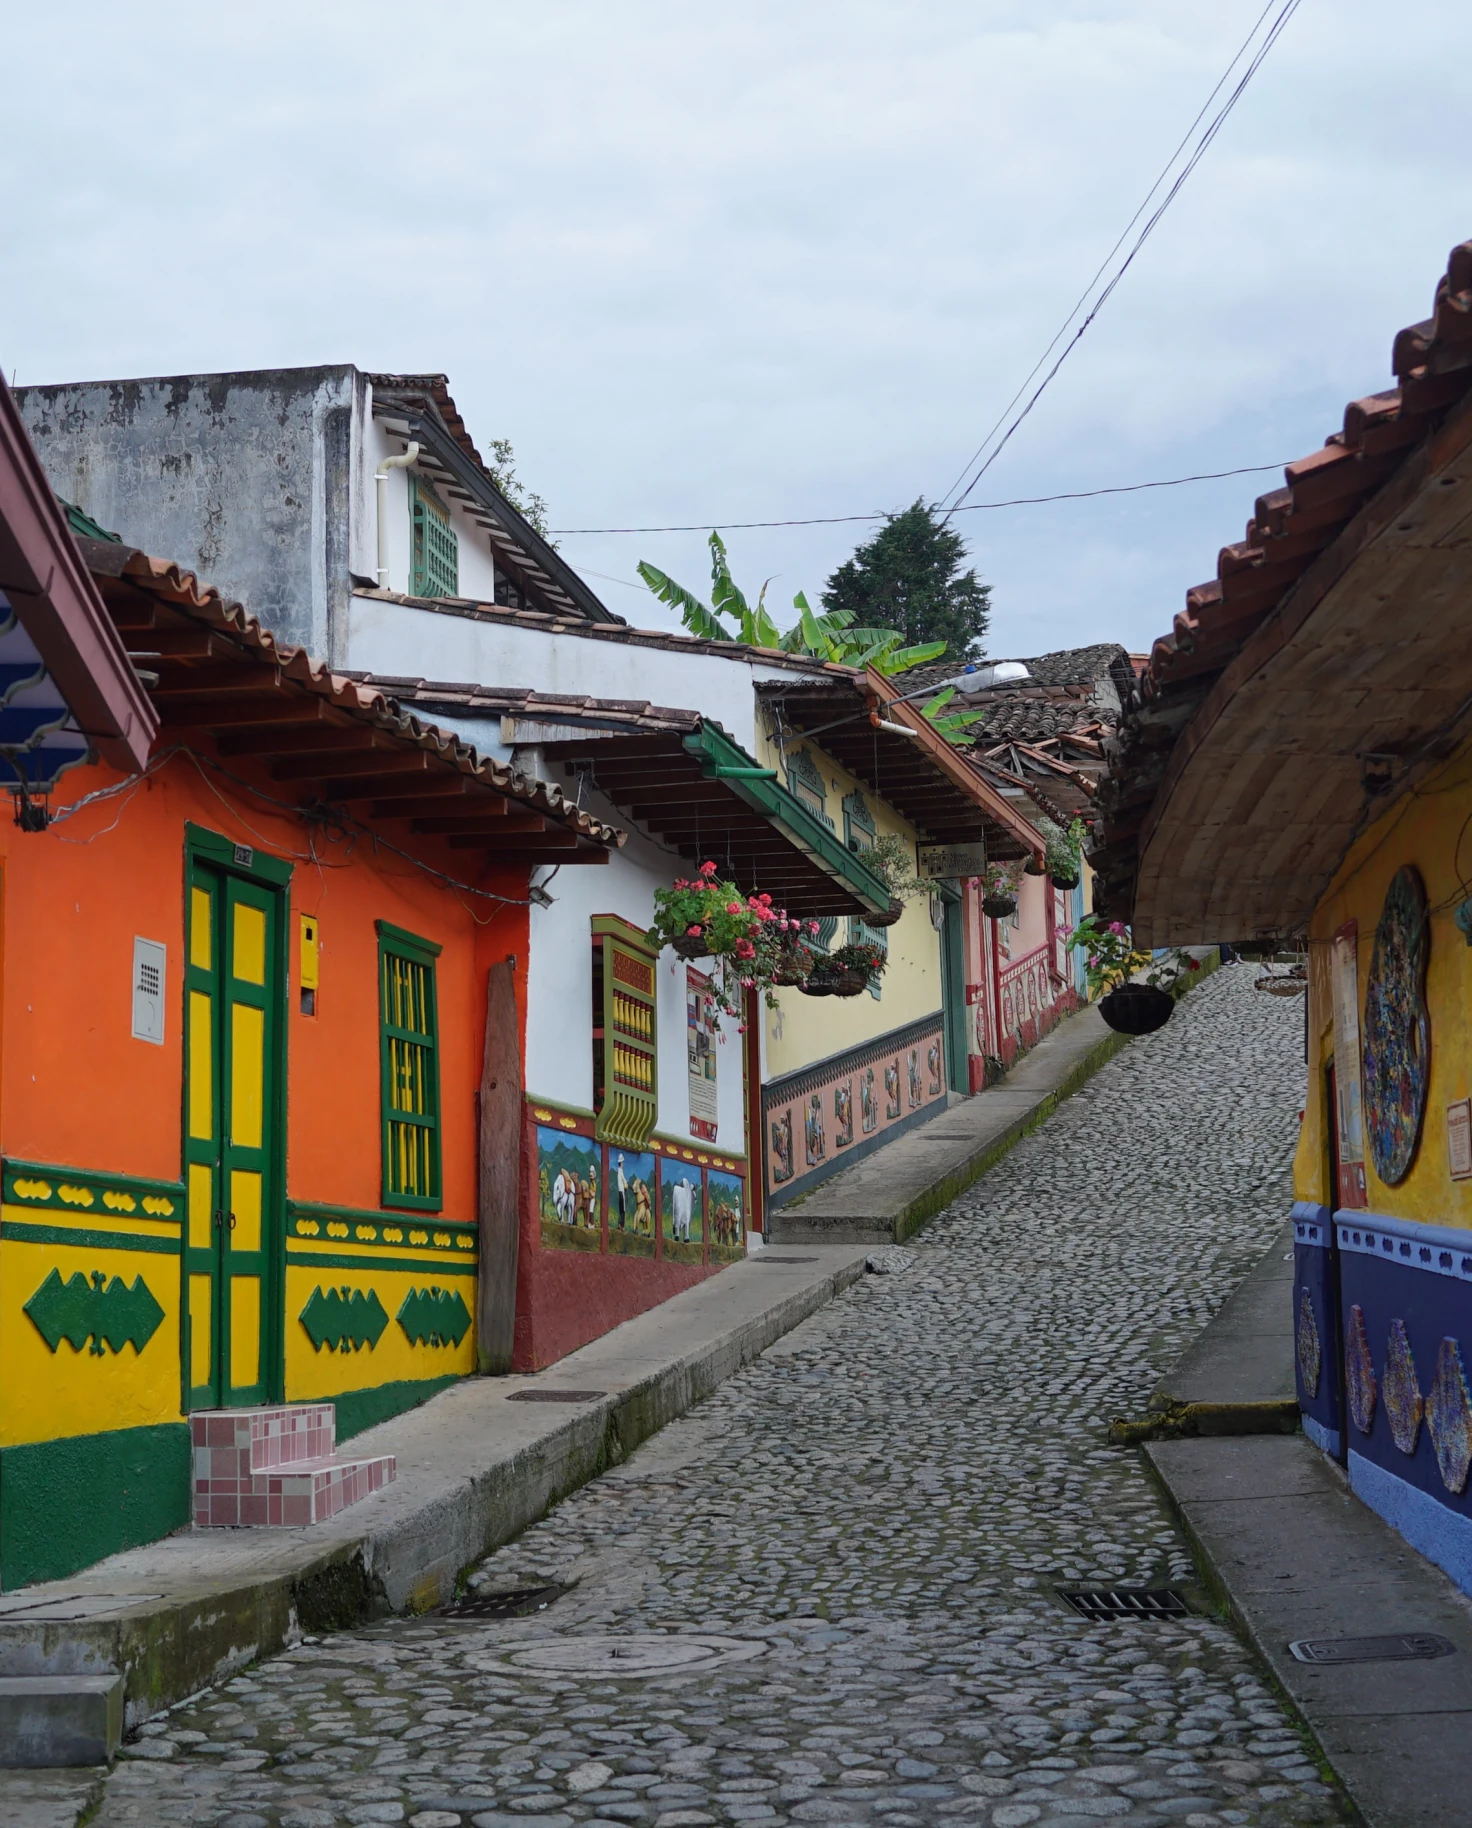 Cobblestone street lined with small buildings with colorful walls